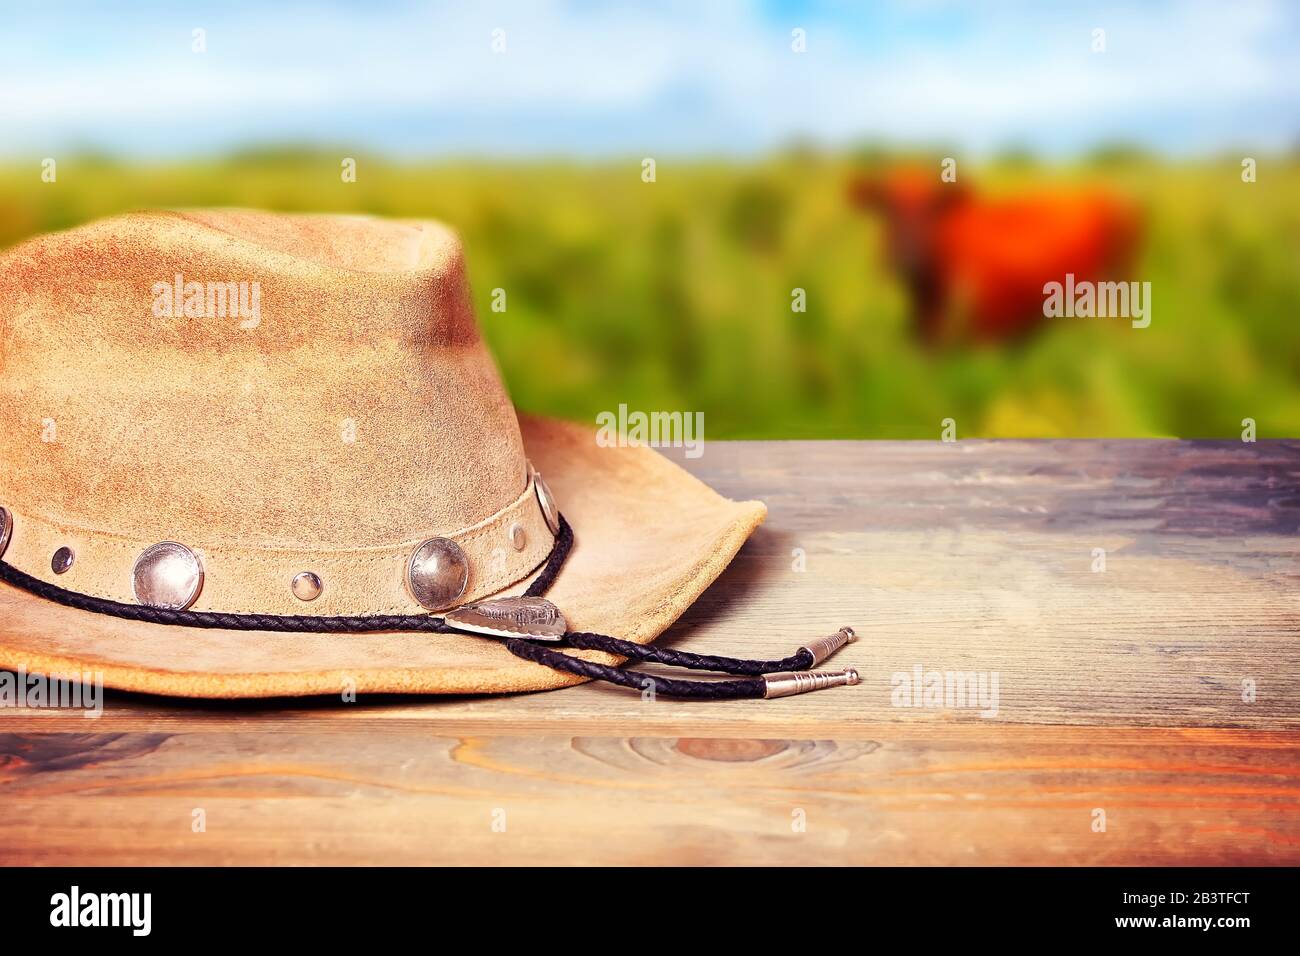 https://c8.alamy.com/comp/2B3TFCT/brown-cowboy-hat-on-a-wooden-table-with-cow-on-the-meadow-on-the-background-2B3TFCT.jpg